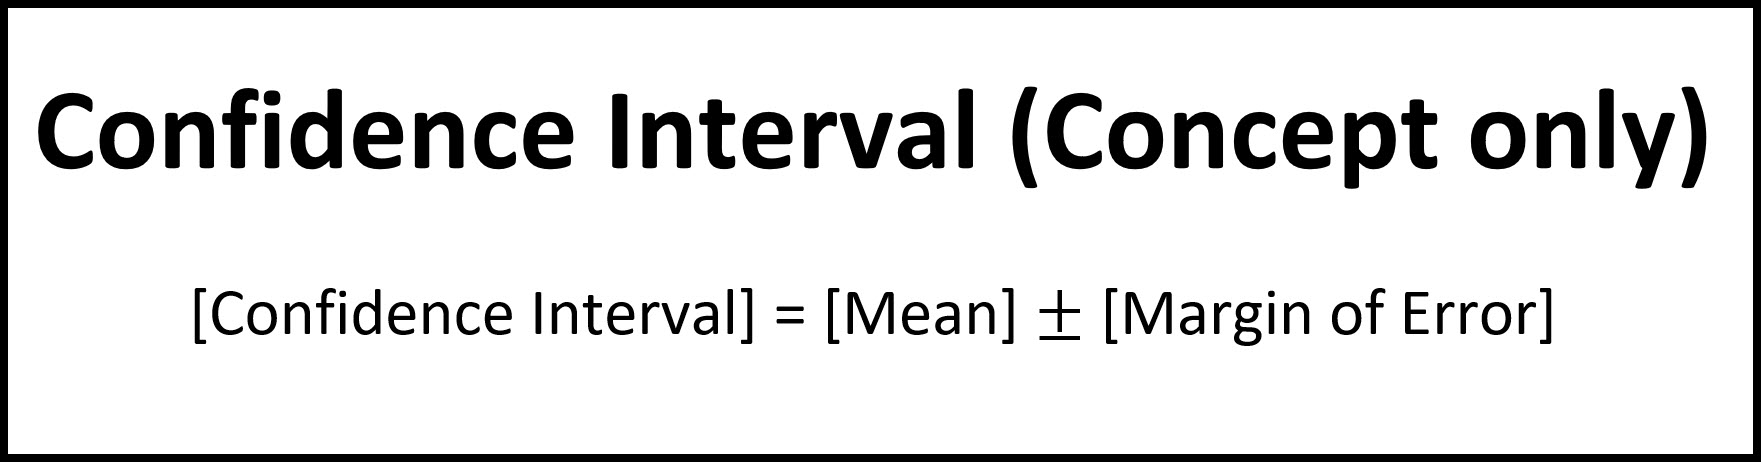 Notes for Confidence Interval